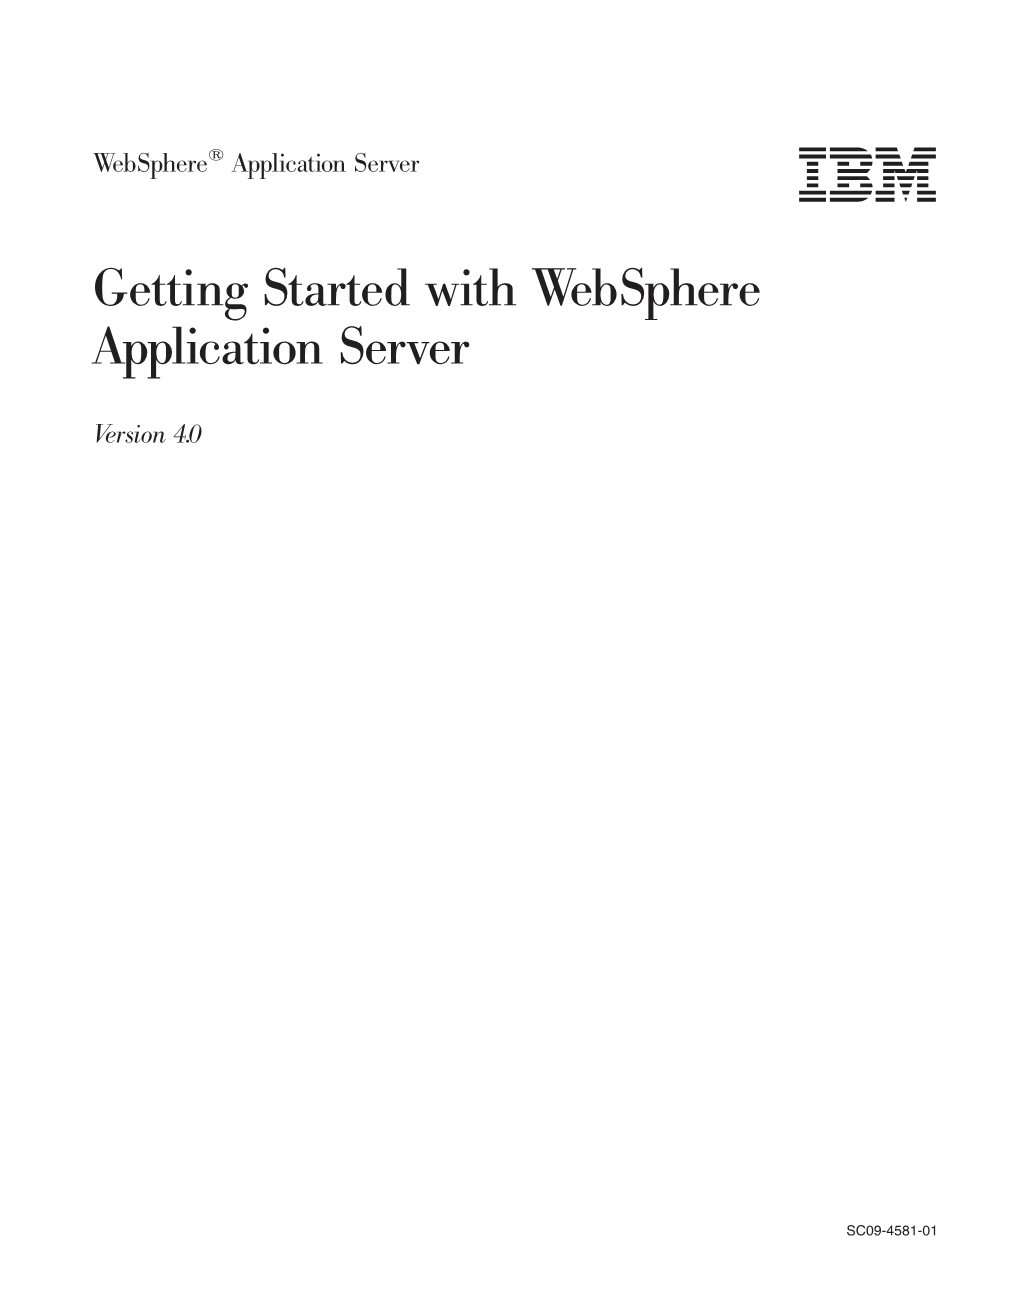 Getting Started with Websphere Application Server